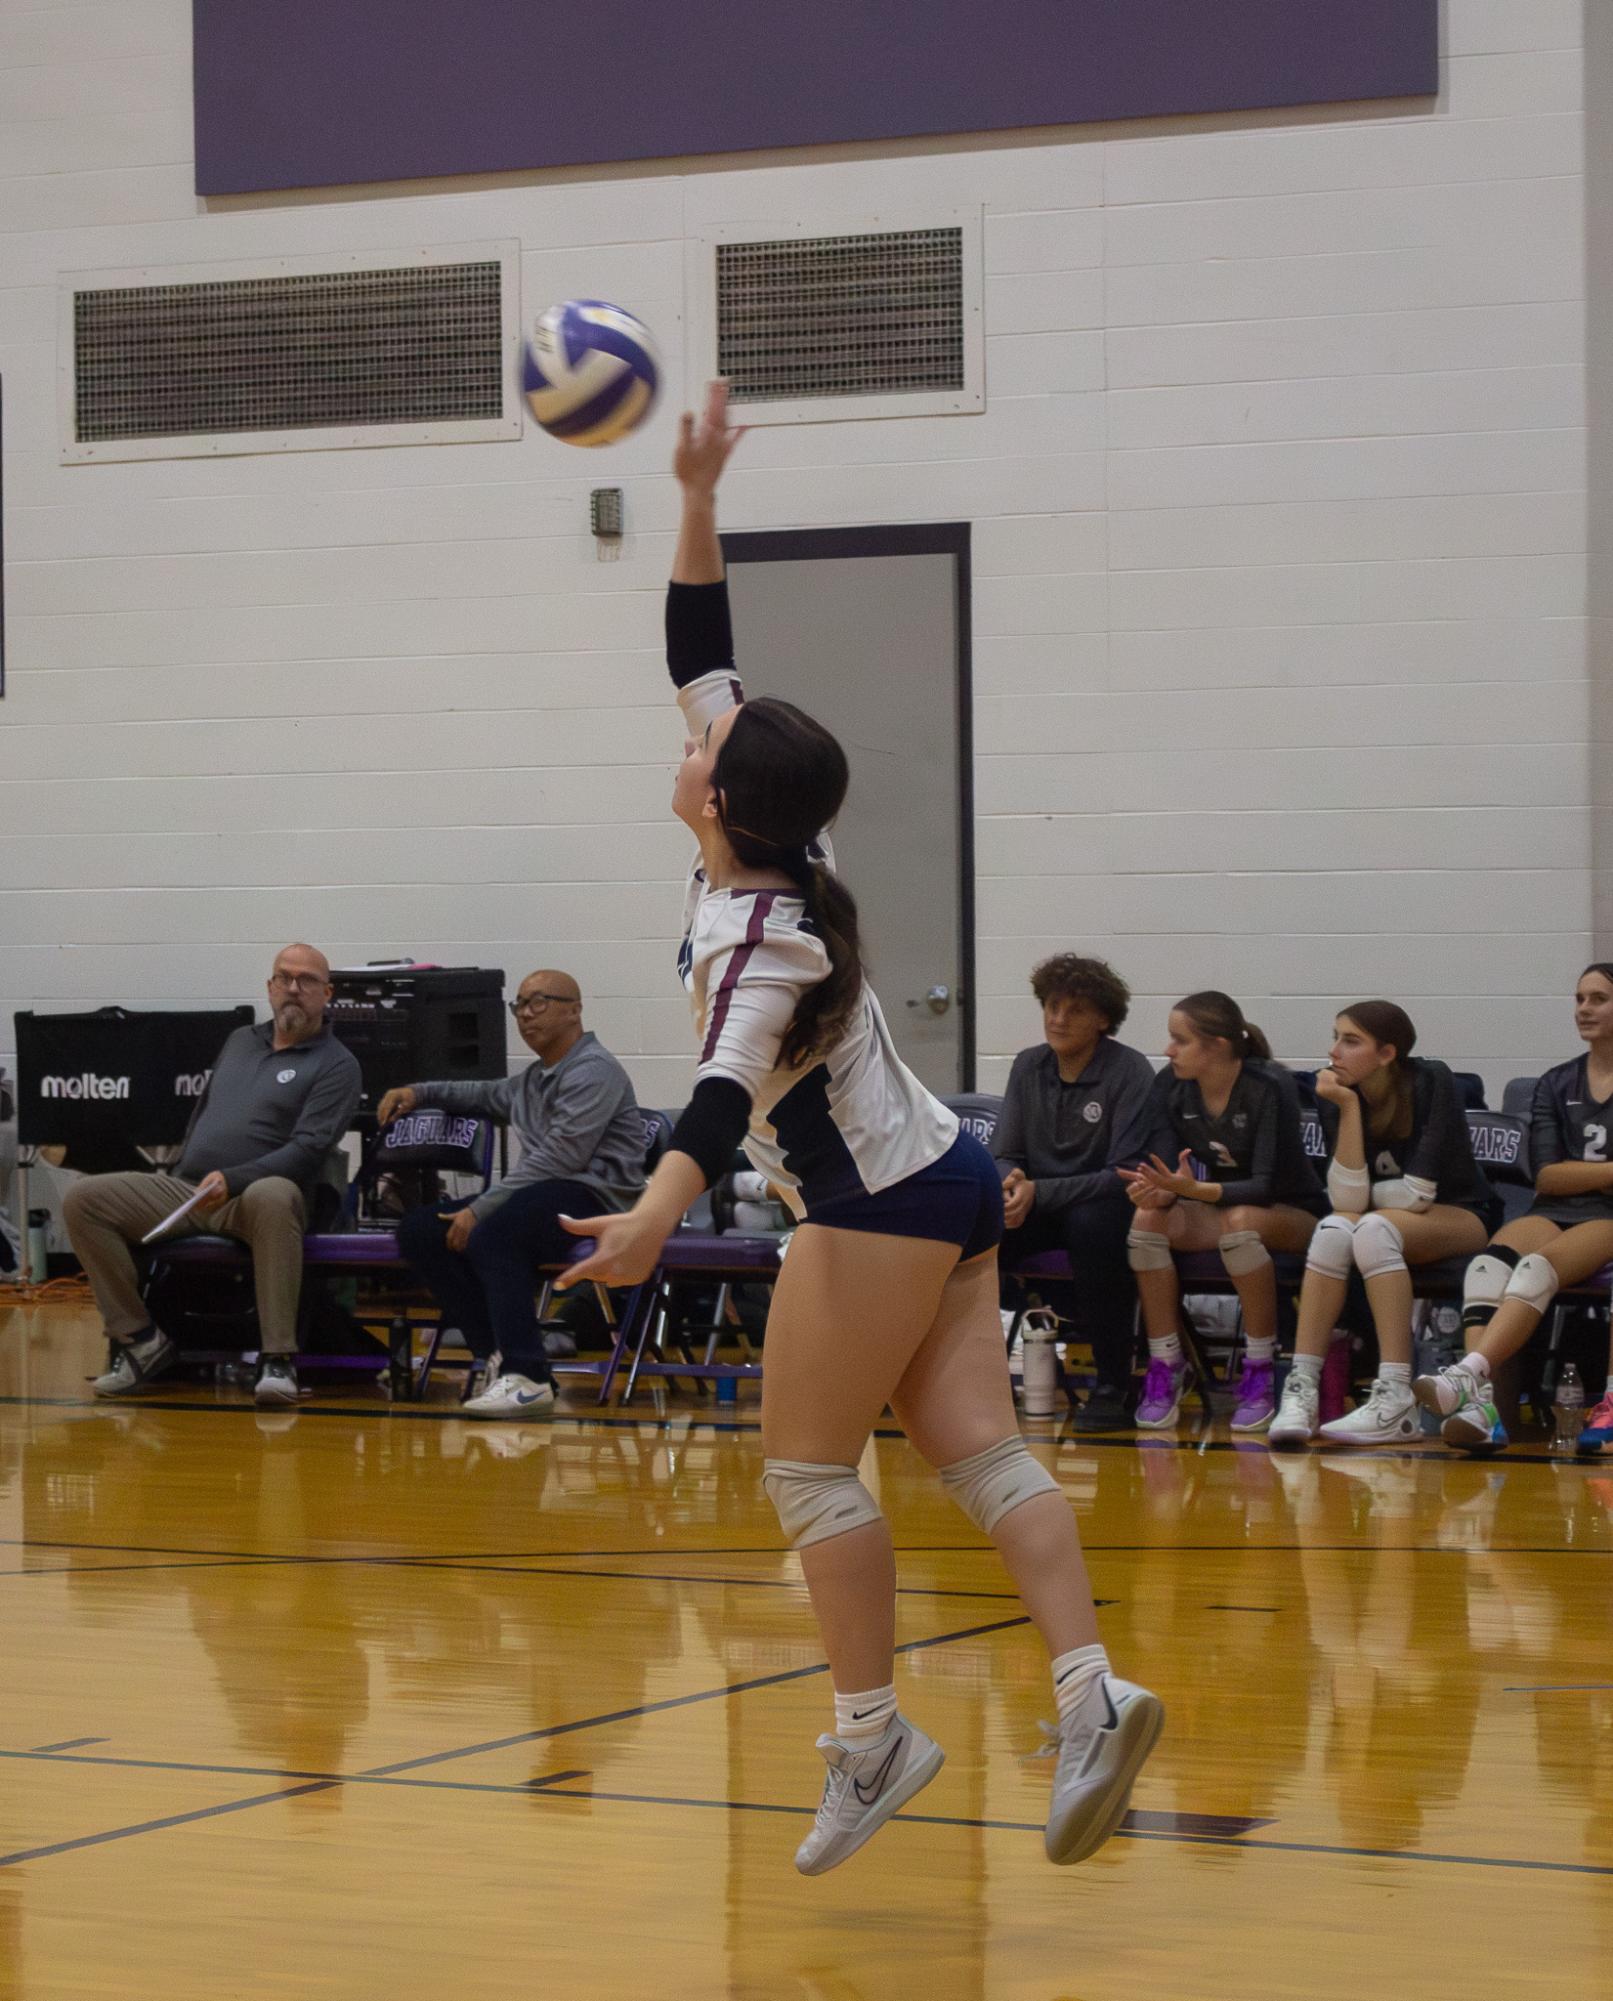 Senior Alexa Sansone serves the ball to the other side of the court.